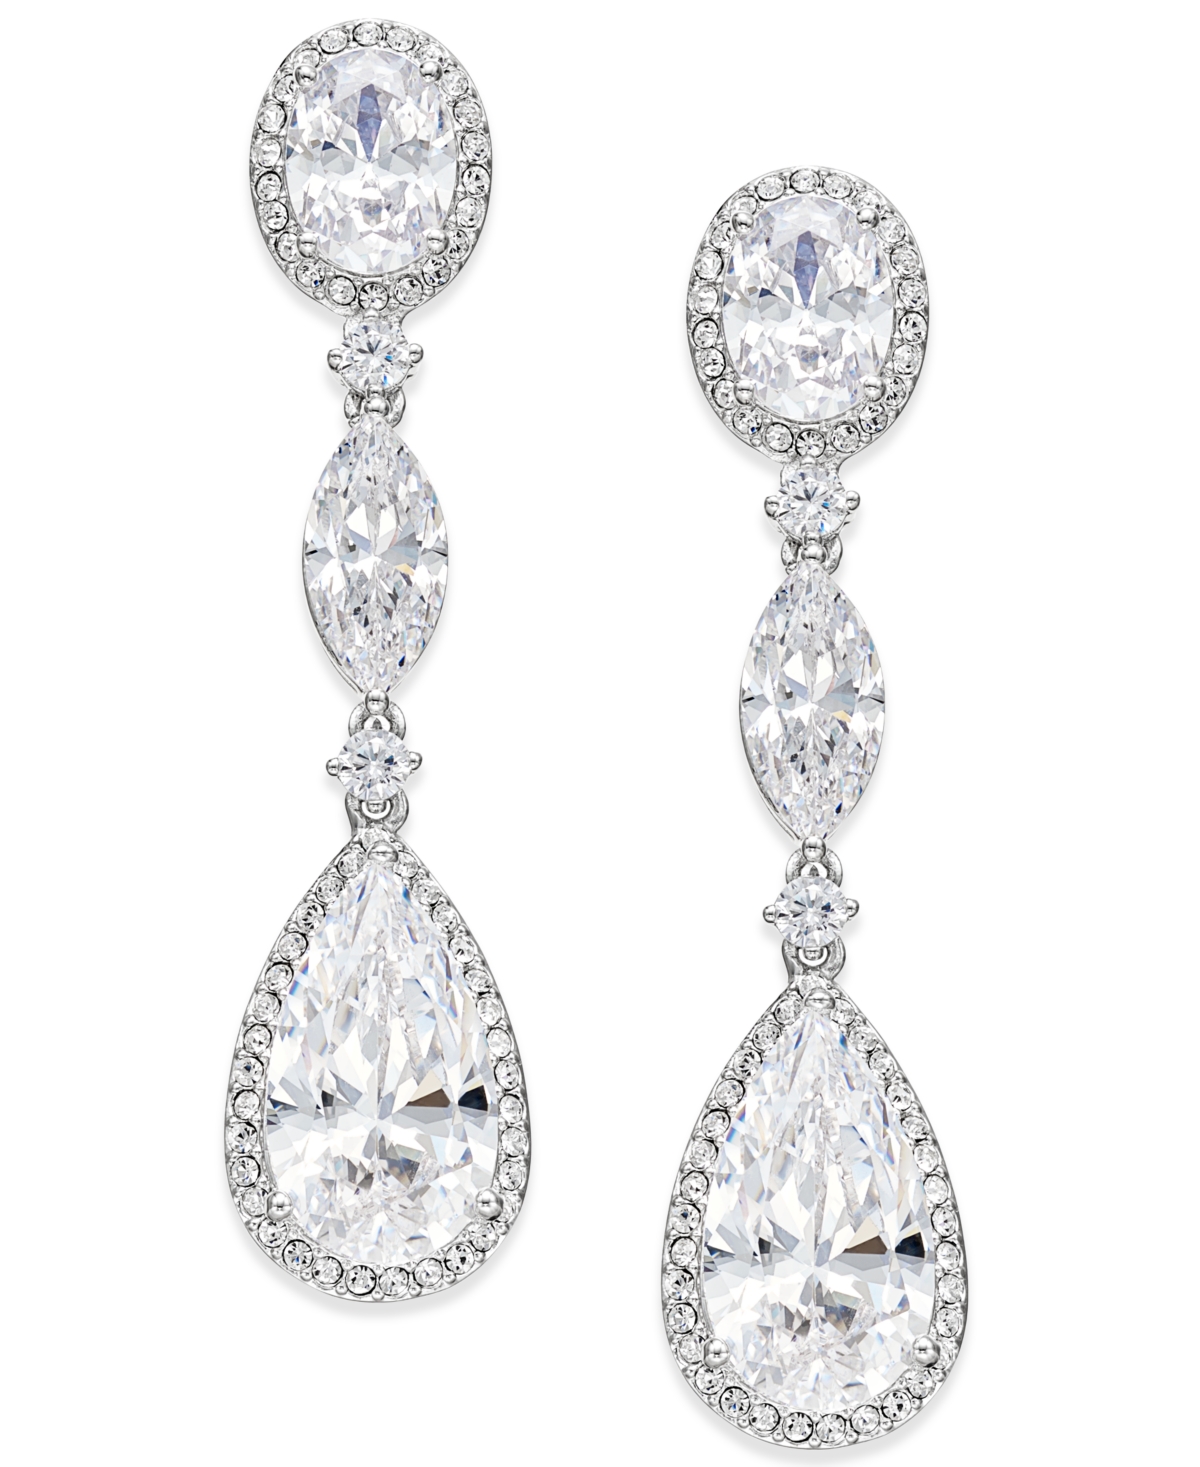 Oval Crystal Drop Earrings, Created for Macy's - Gold